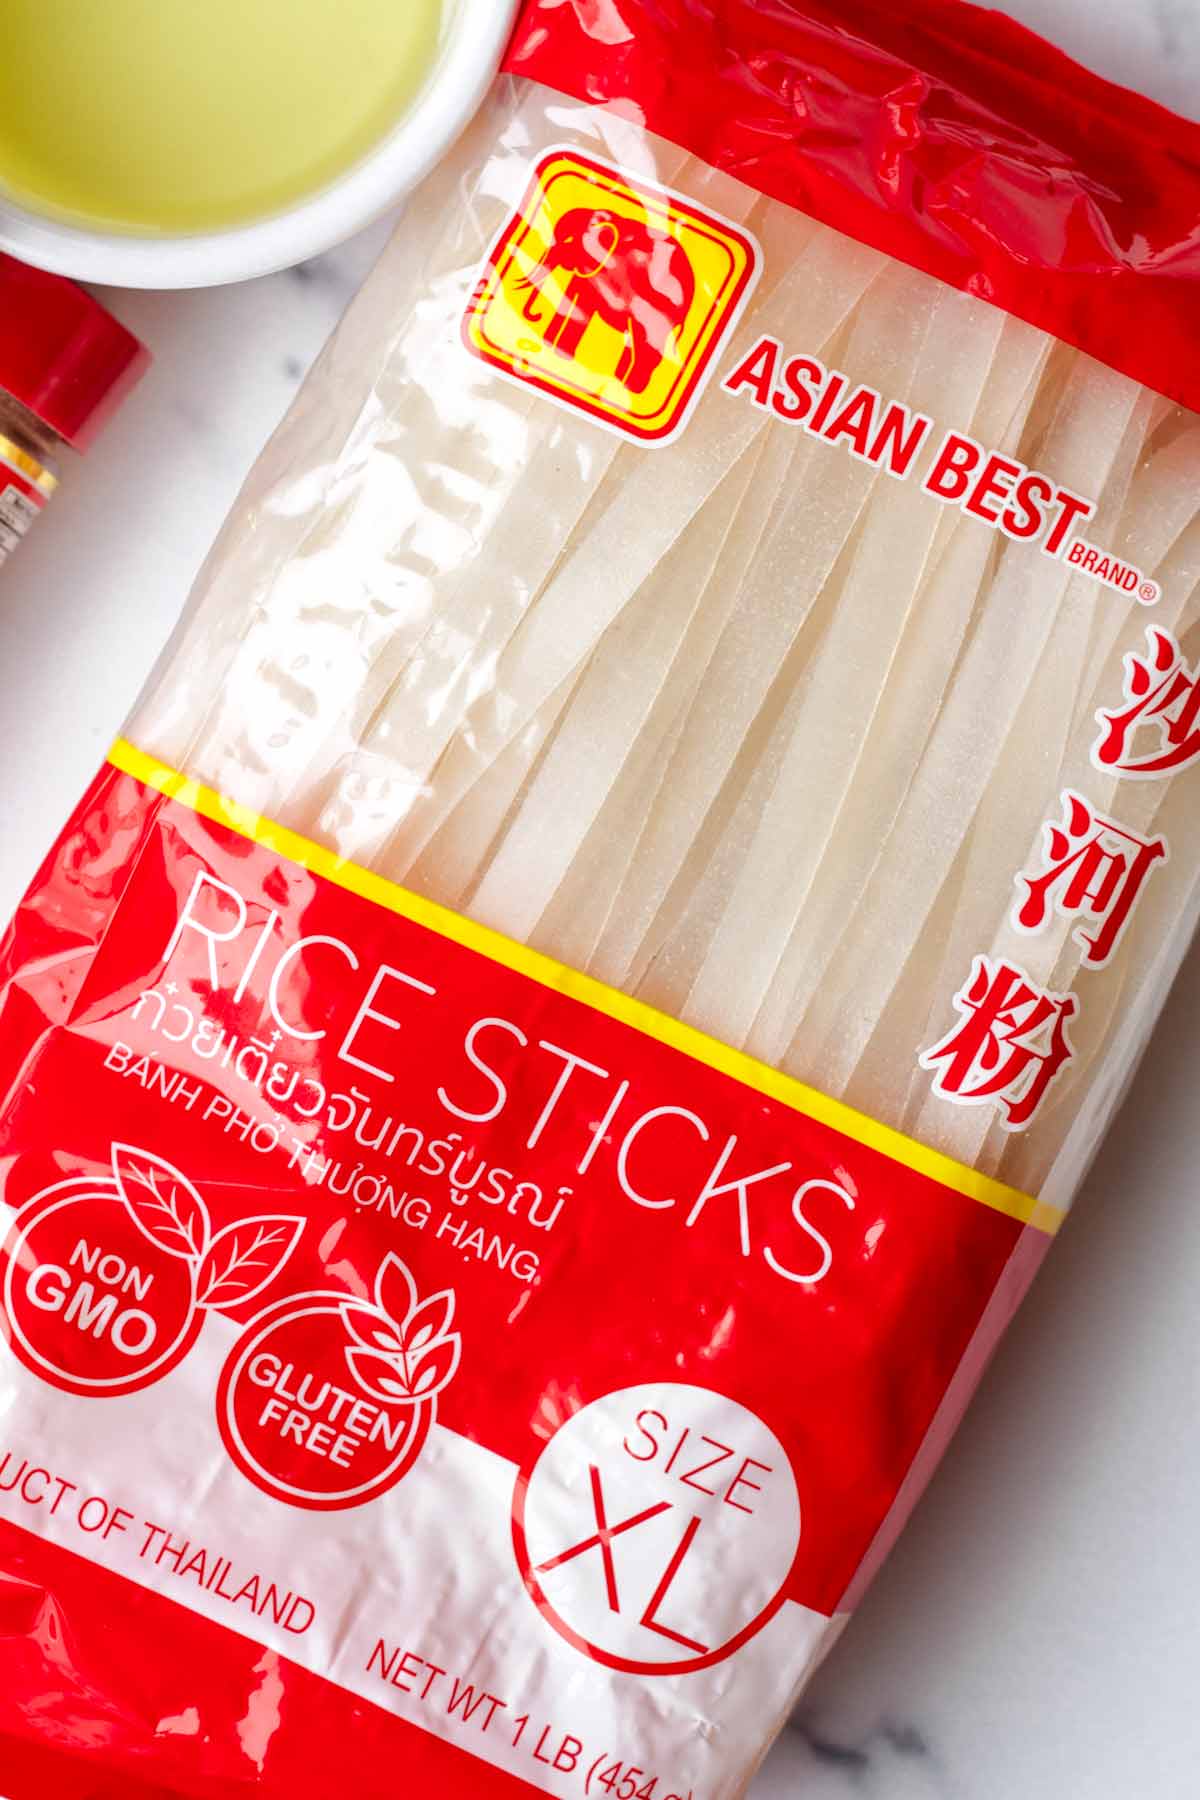 extra wide rice sticks in packaging